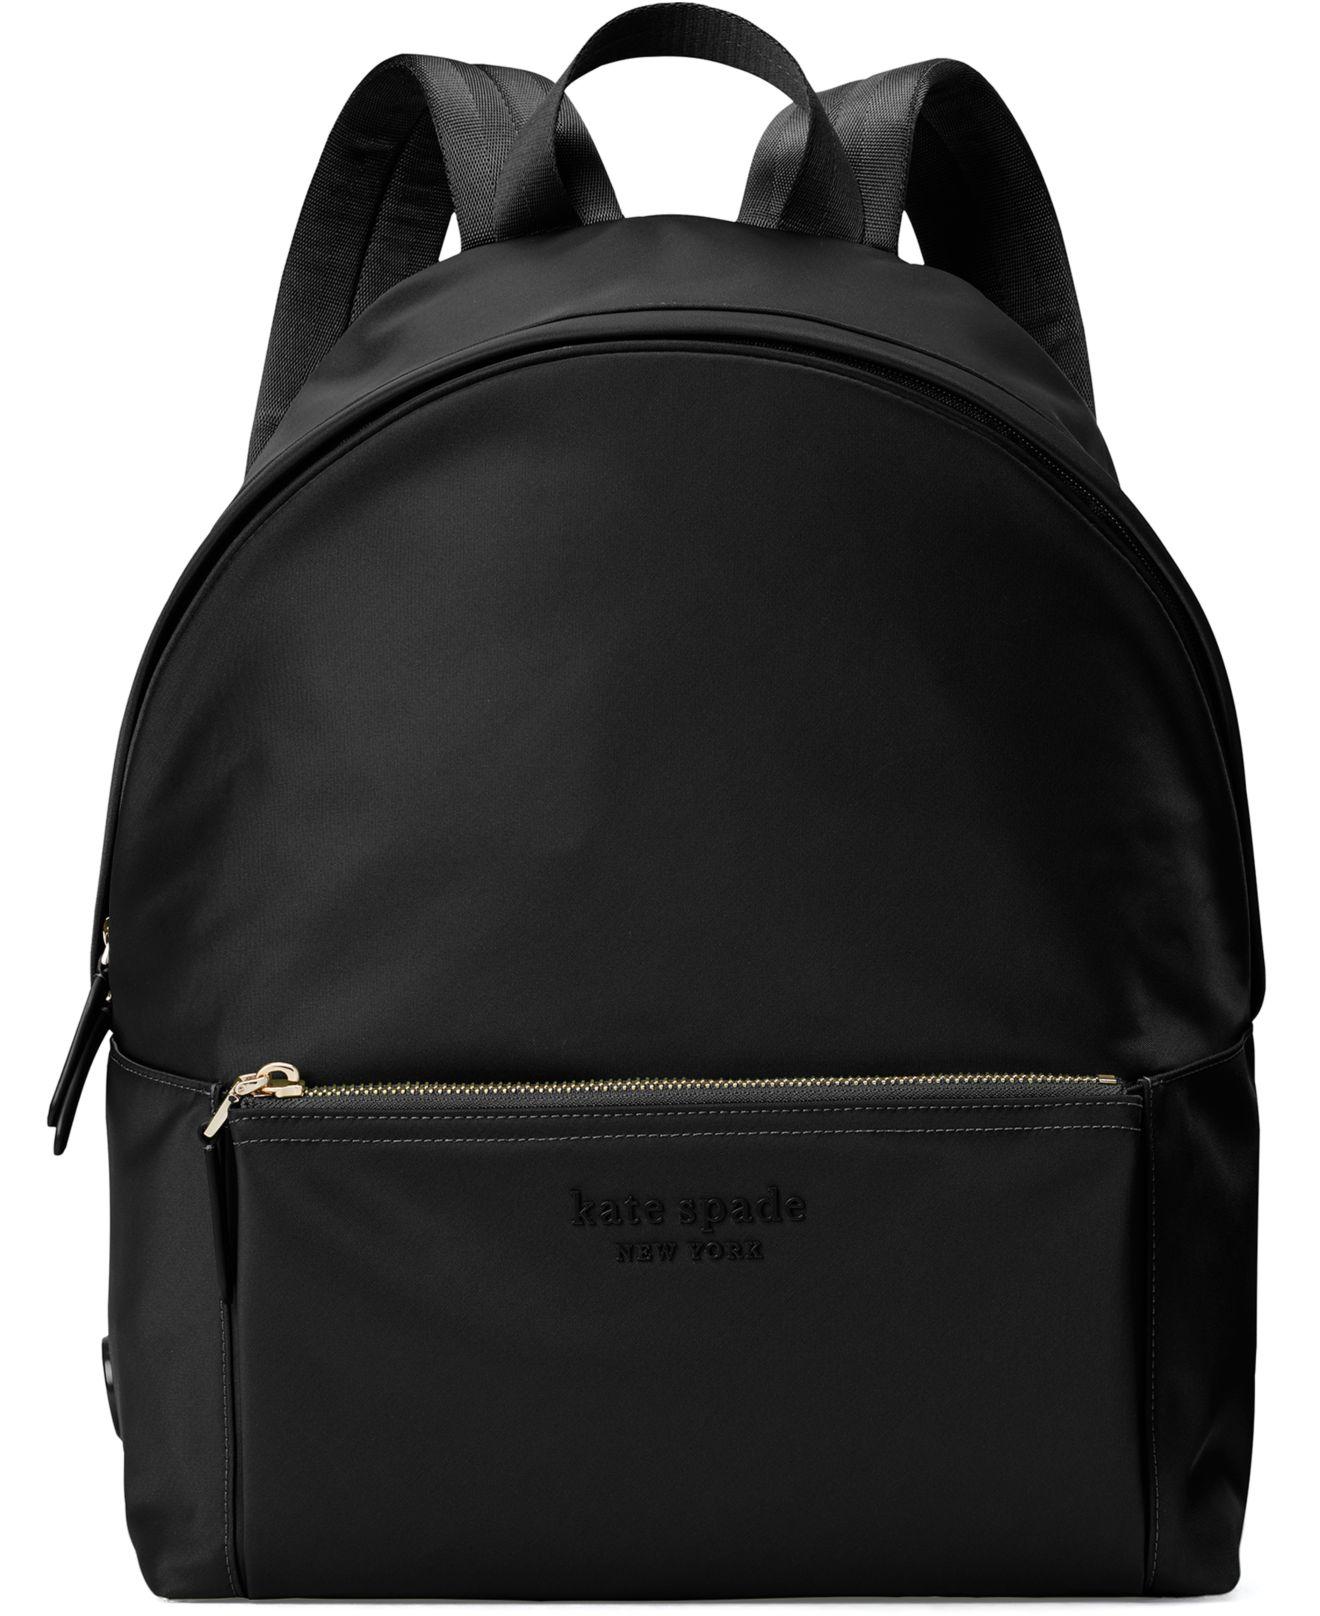 Kate Spade The Nylon City Pack Large Backpack in Black | Lyst